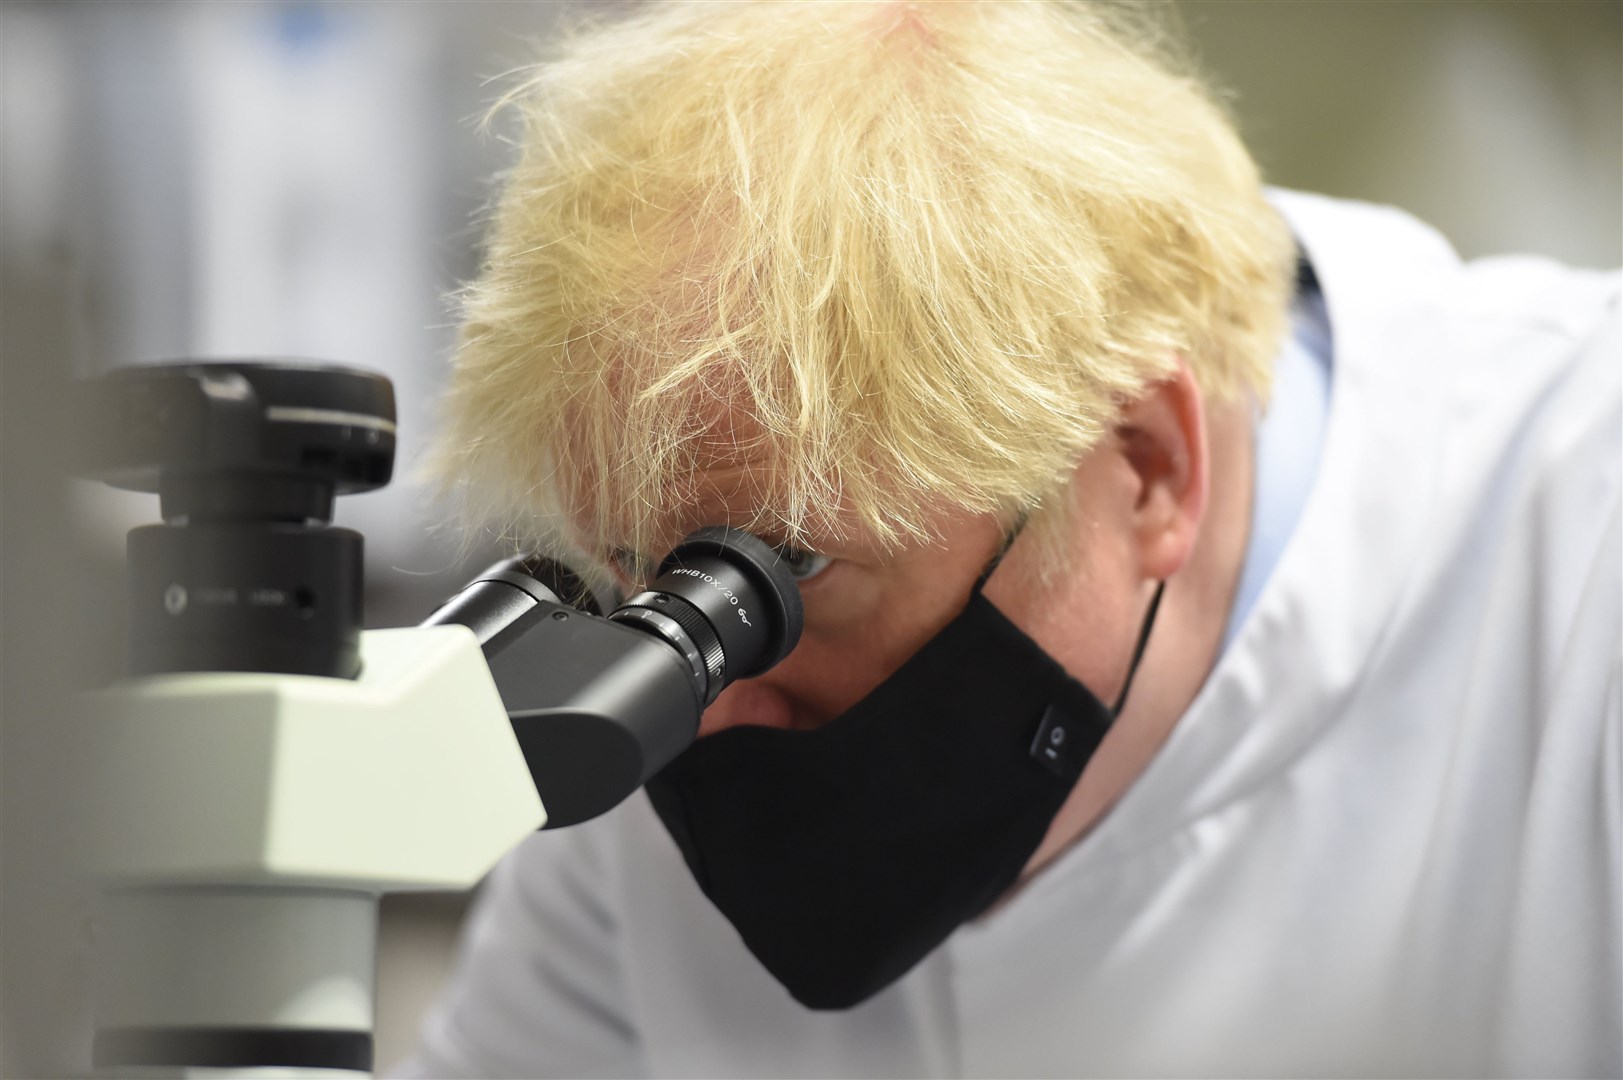 Prime Minister Boris Johnson during a visit to the National Institute for Biological Standards in South Mimms, Hertfordshire (Jeremy Selwyn/Evening Standard/PA)